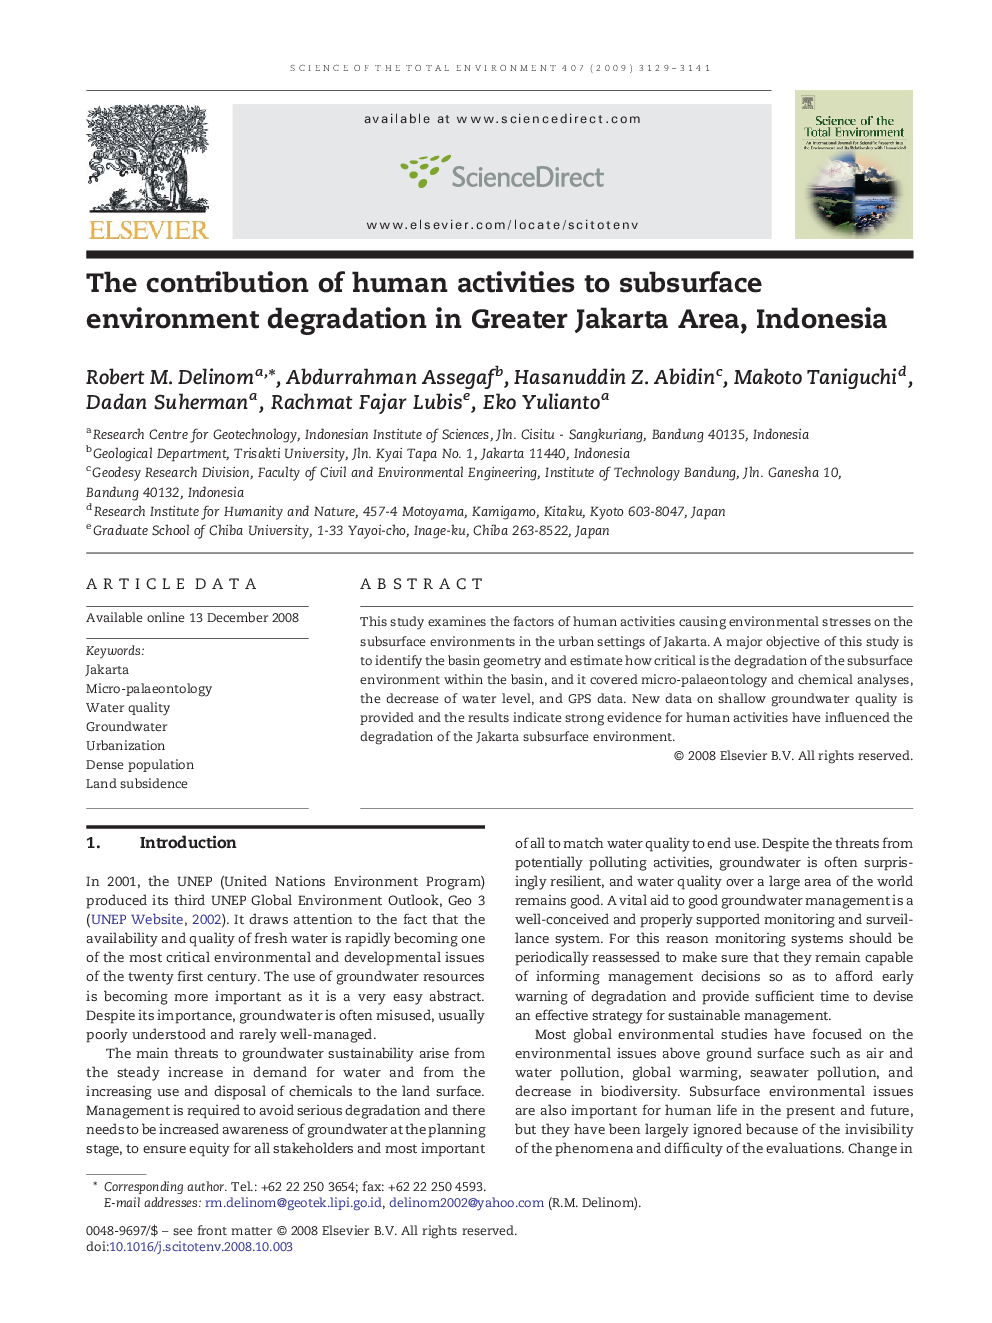 The contribution of human activities to subsurface environment degradation in Greater Jakarta Area, Indonesia